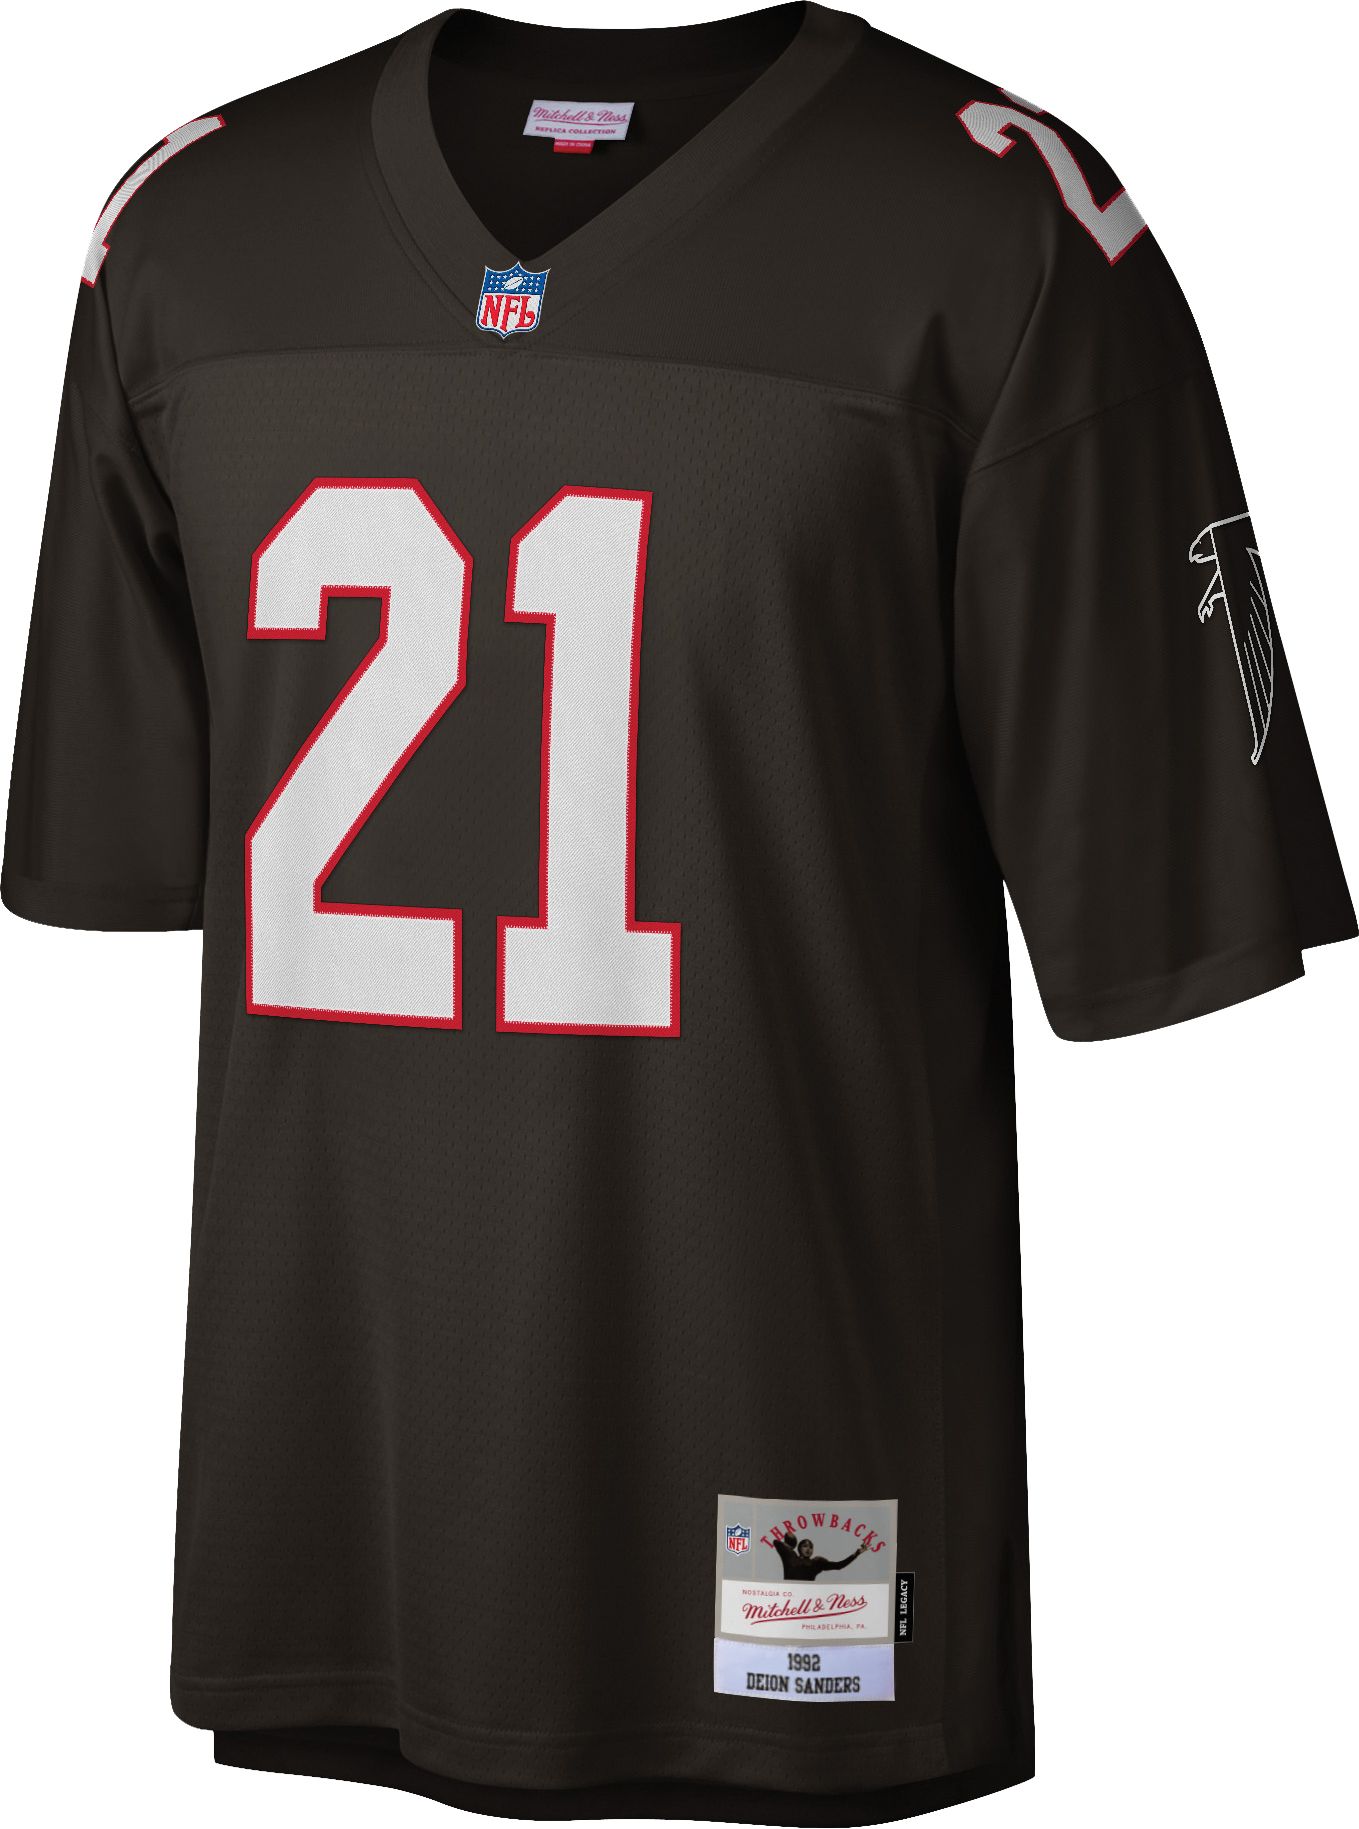 deion sanders mitchell and ness falcons jersey